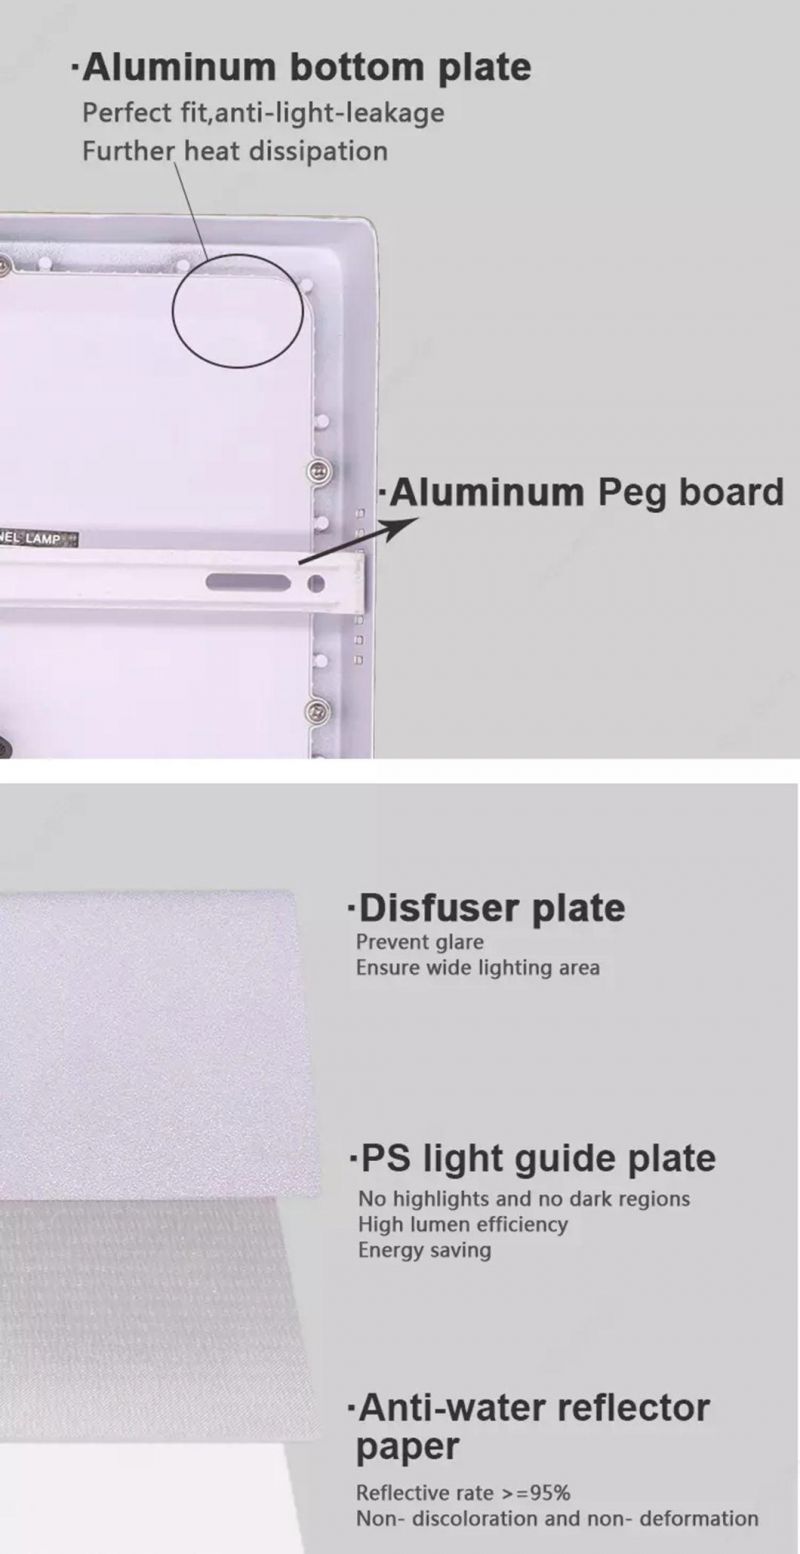 Slim Design Wall Surface Mounted Square Ceiling LED Panel Light Lamp